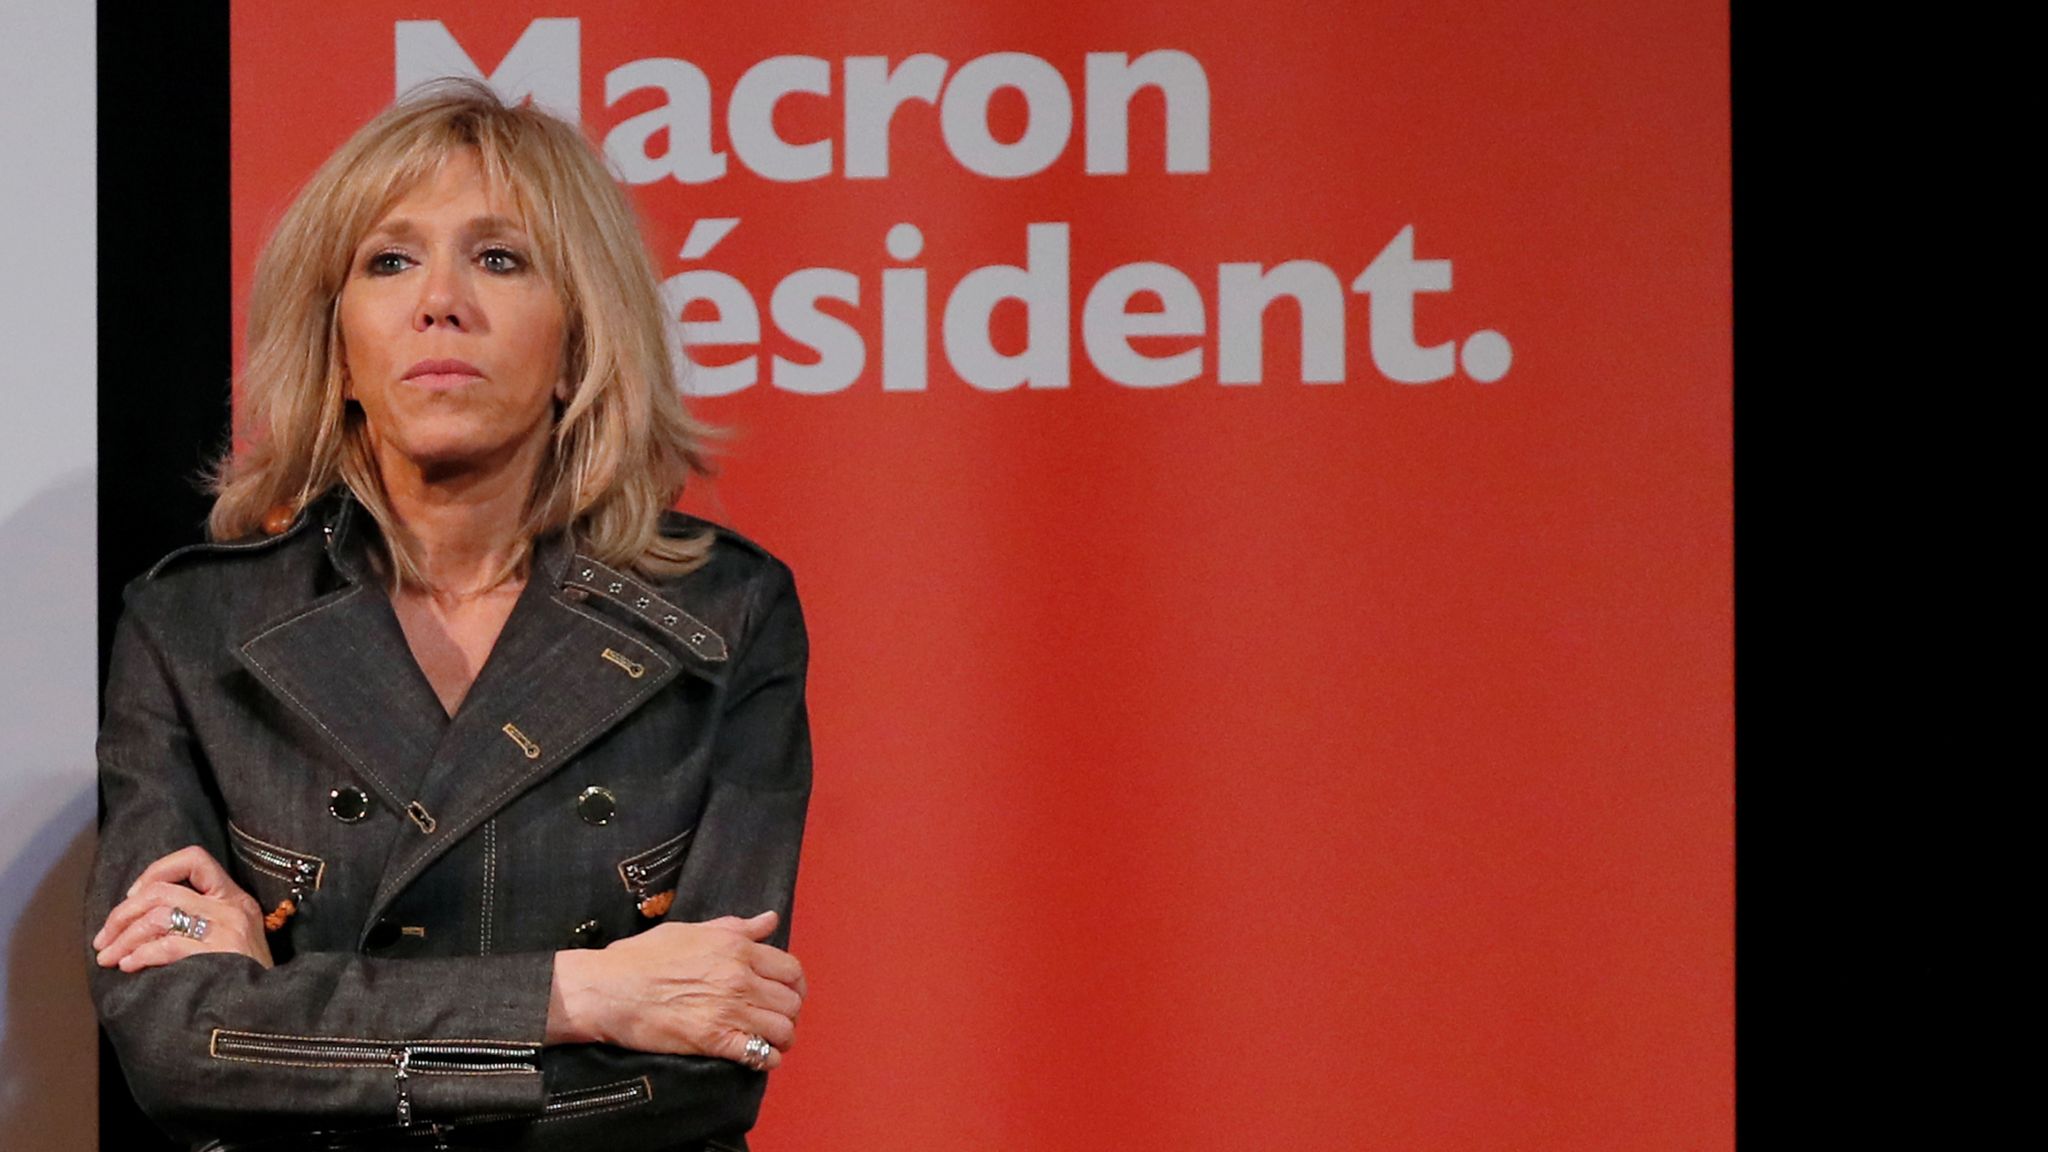 Brigitte Macron Continues Her Romance with Vuitton